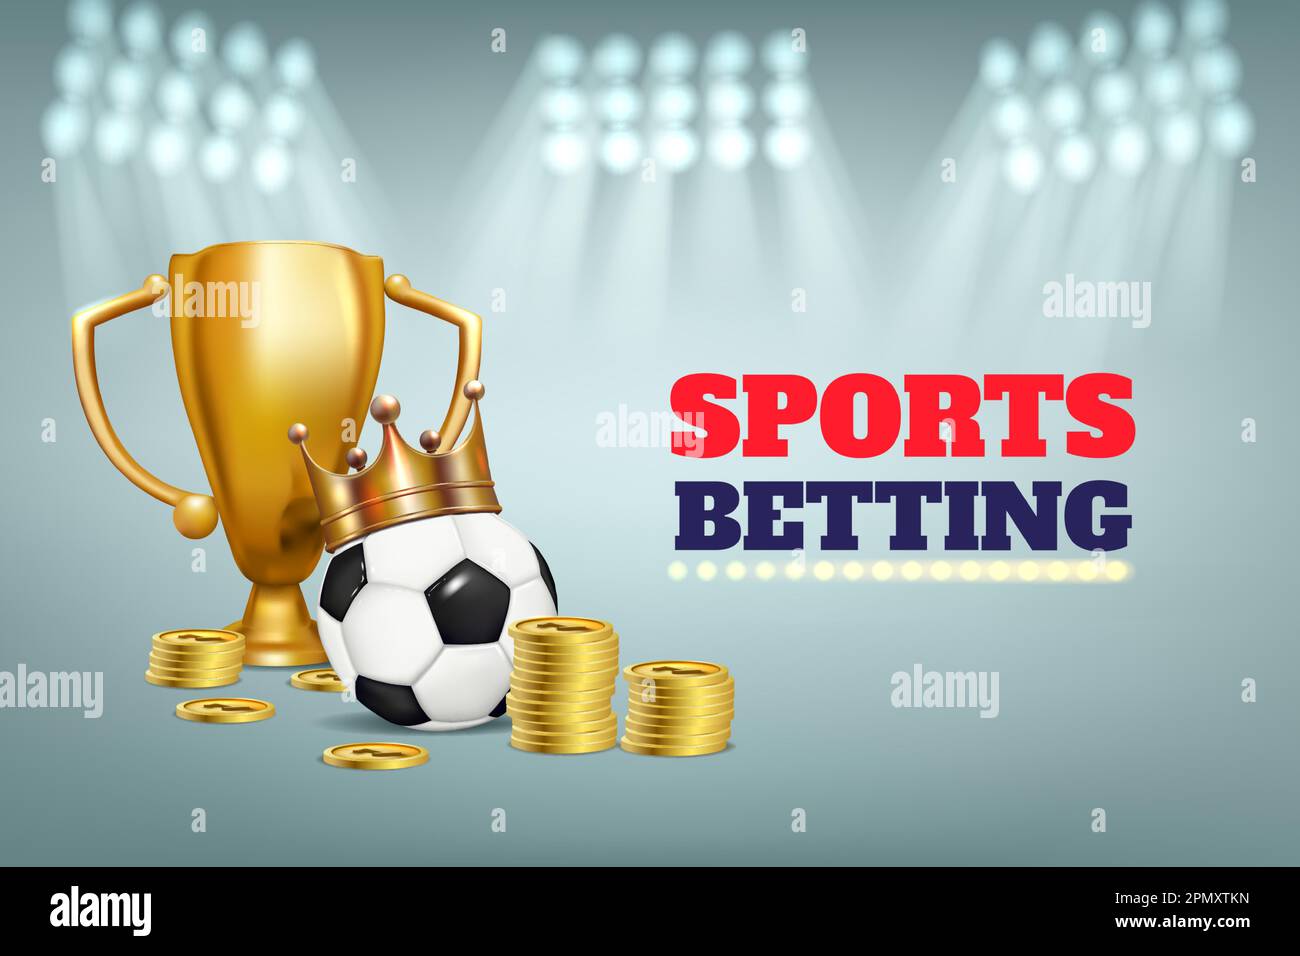 Socccer concept. Sports betting on football. Design for a